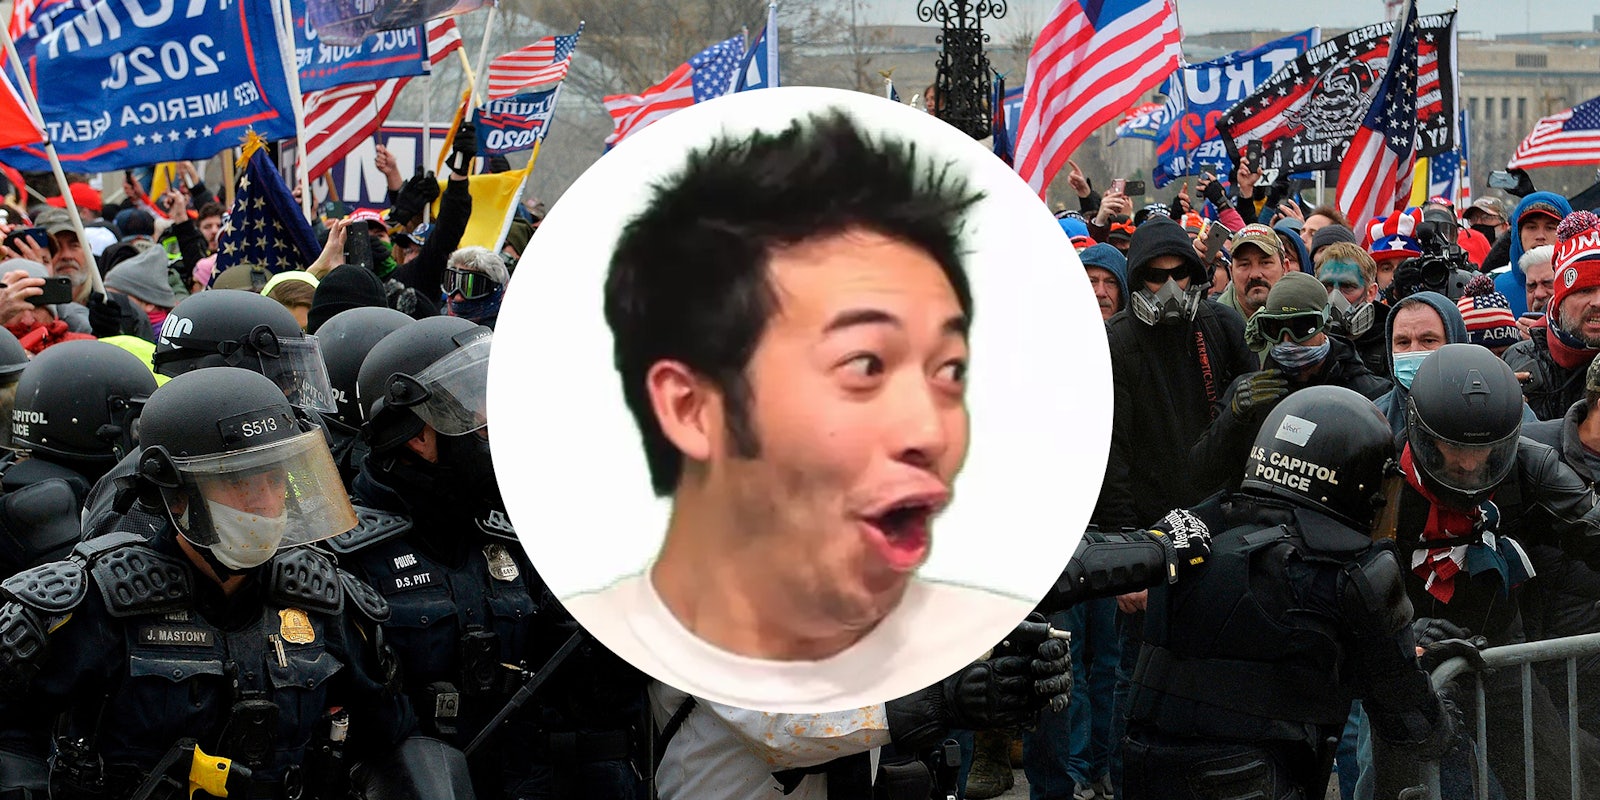 man making surprised face over trump supporters clashing with police